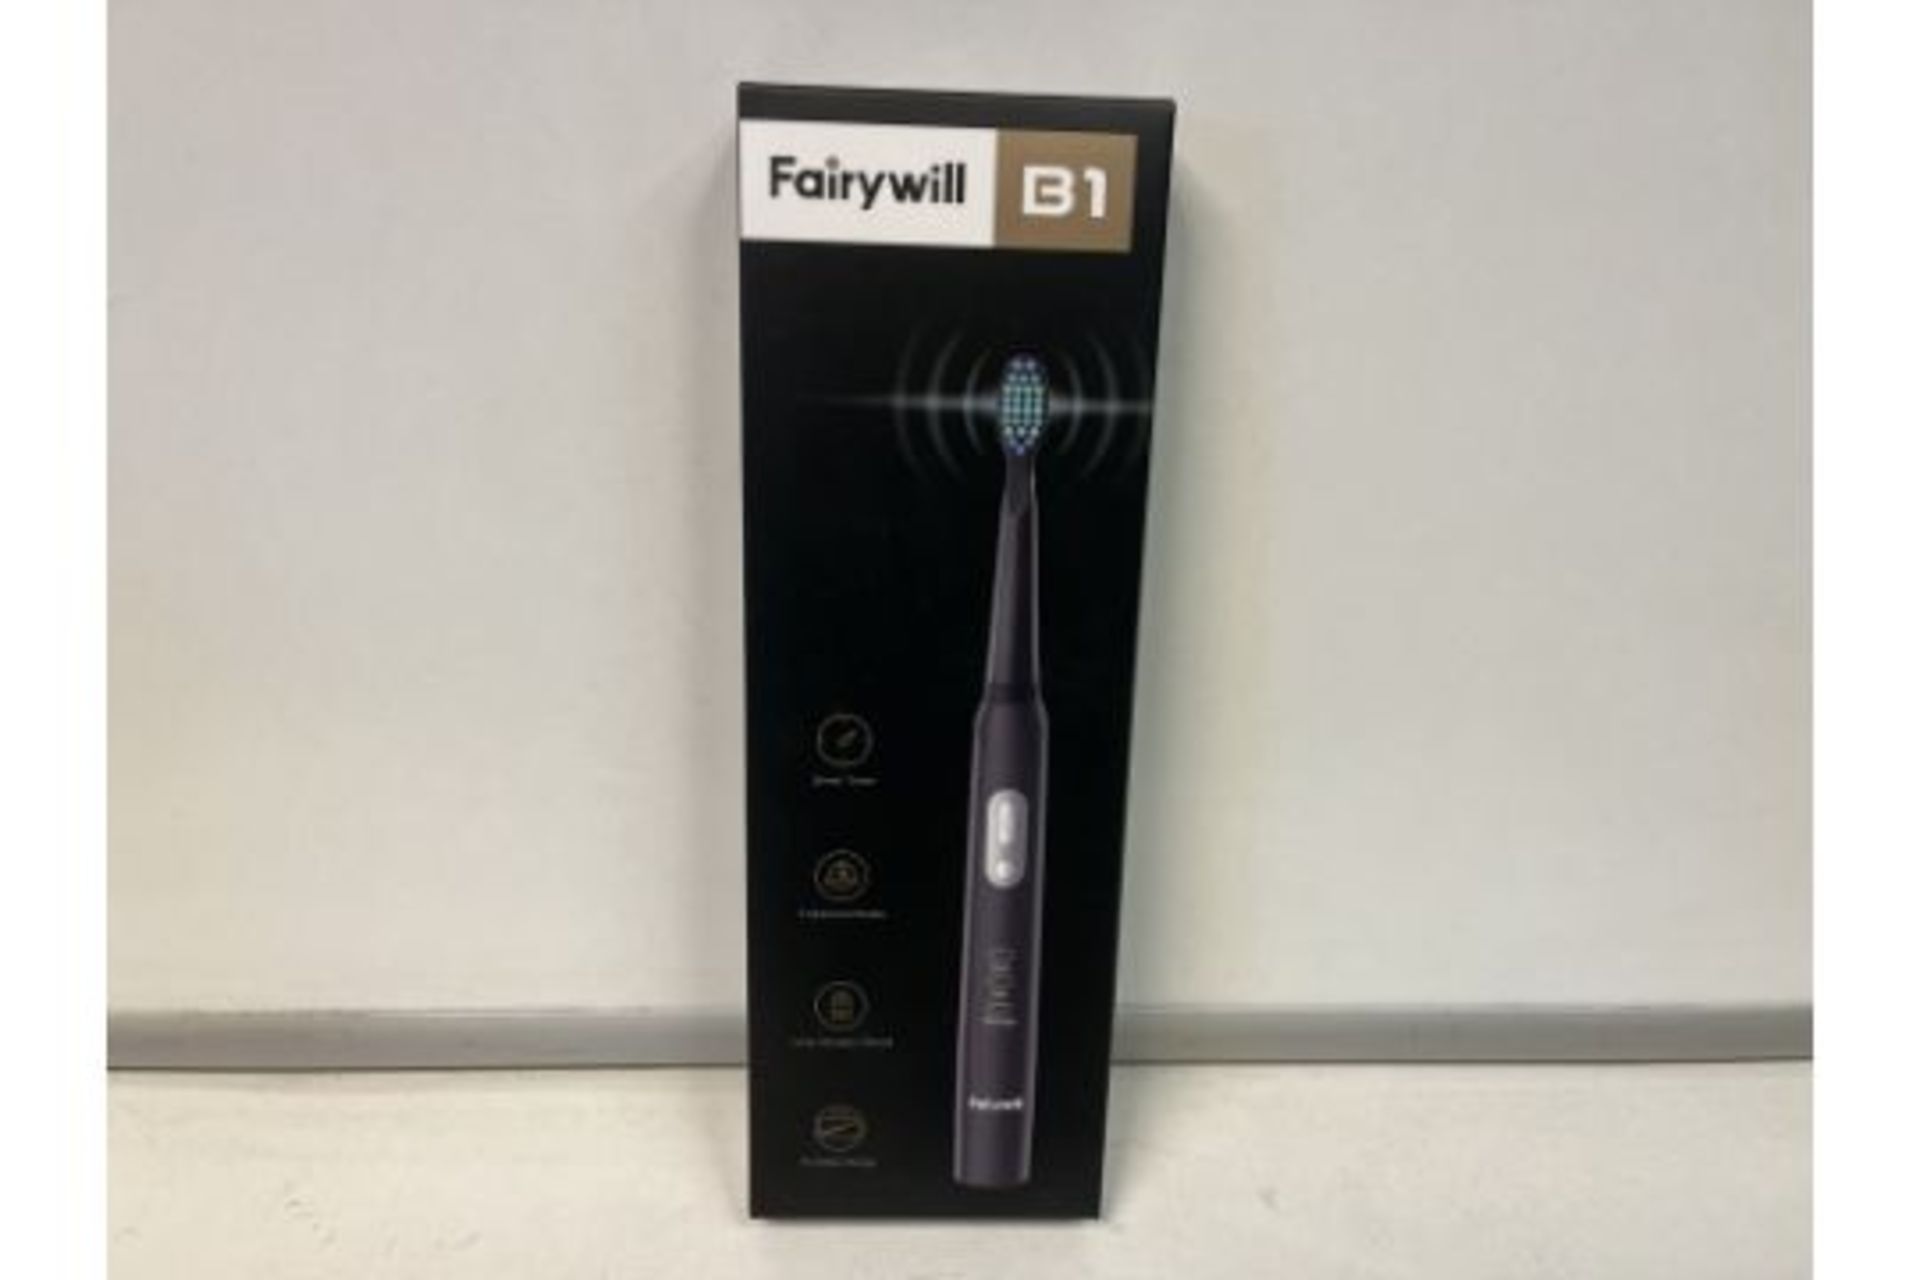 5 X BRAND NEW BOXED FAIRYWELL B1 ELECTRIC TOOTHBRUSH WITH SMART TIMER, 3 MODES, LONG BATTERY,